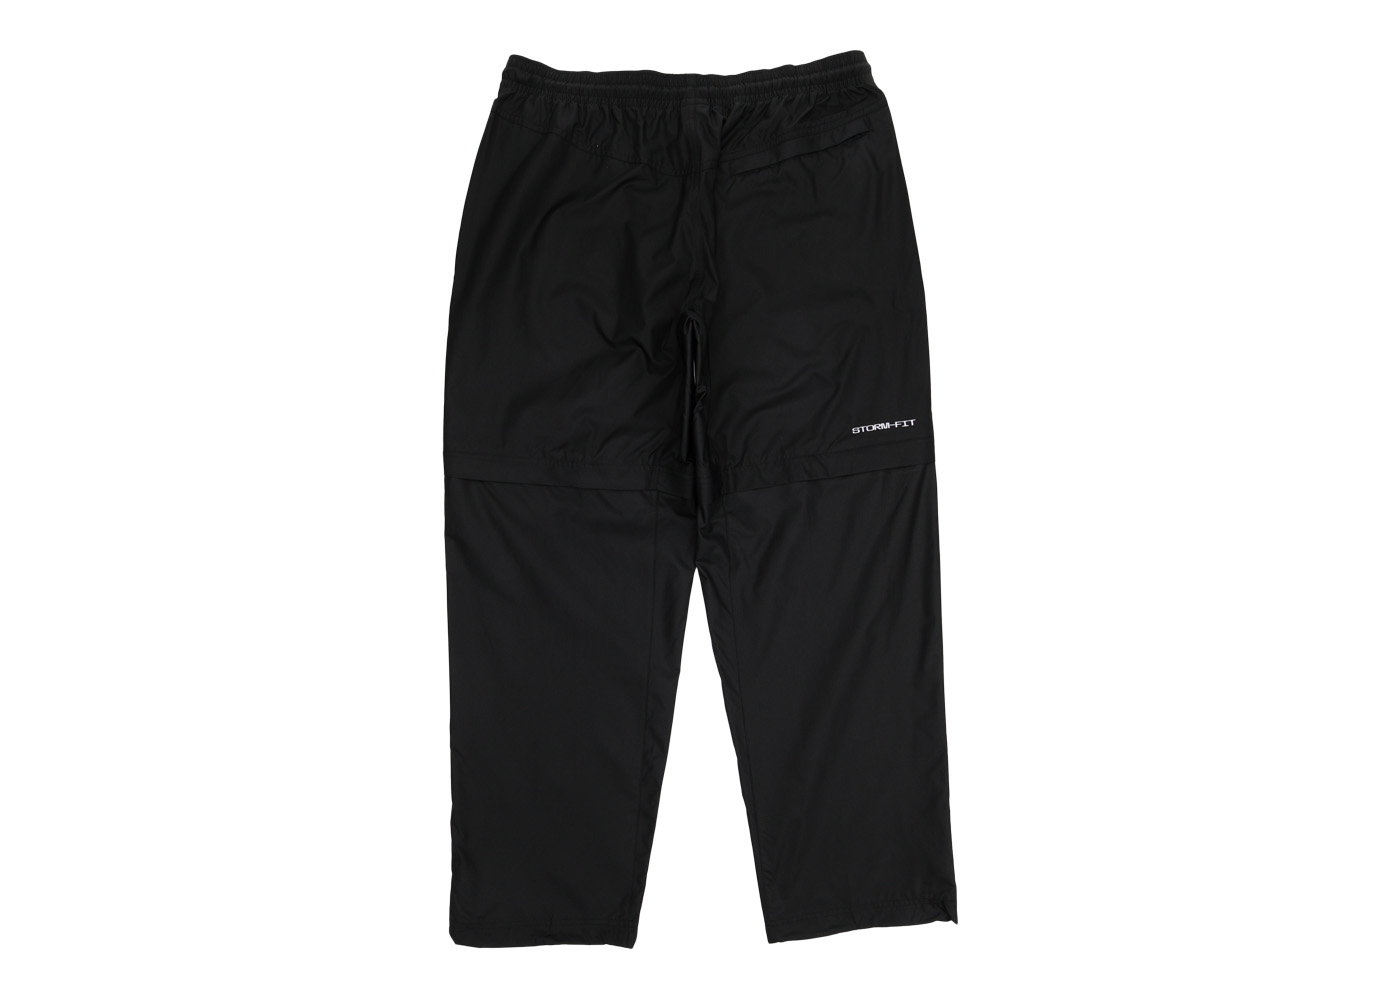 The vintage Nike track pants everyone looking for (w2c in comments) :  r/FashionReps